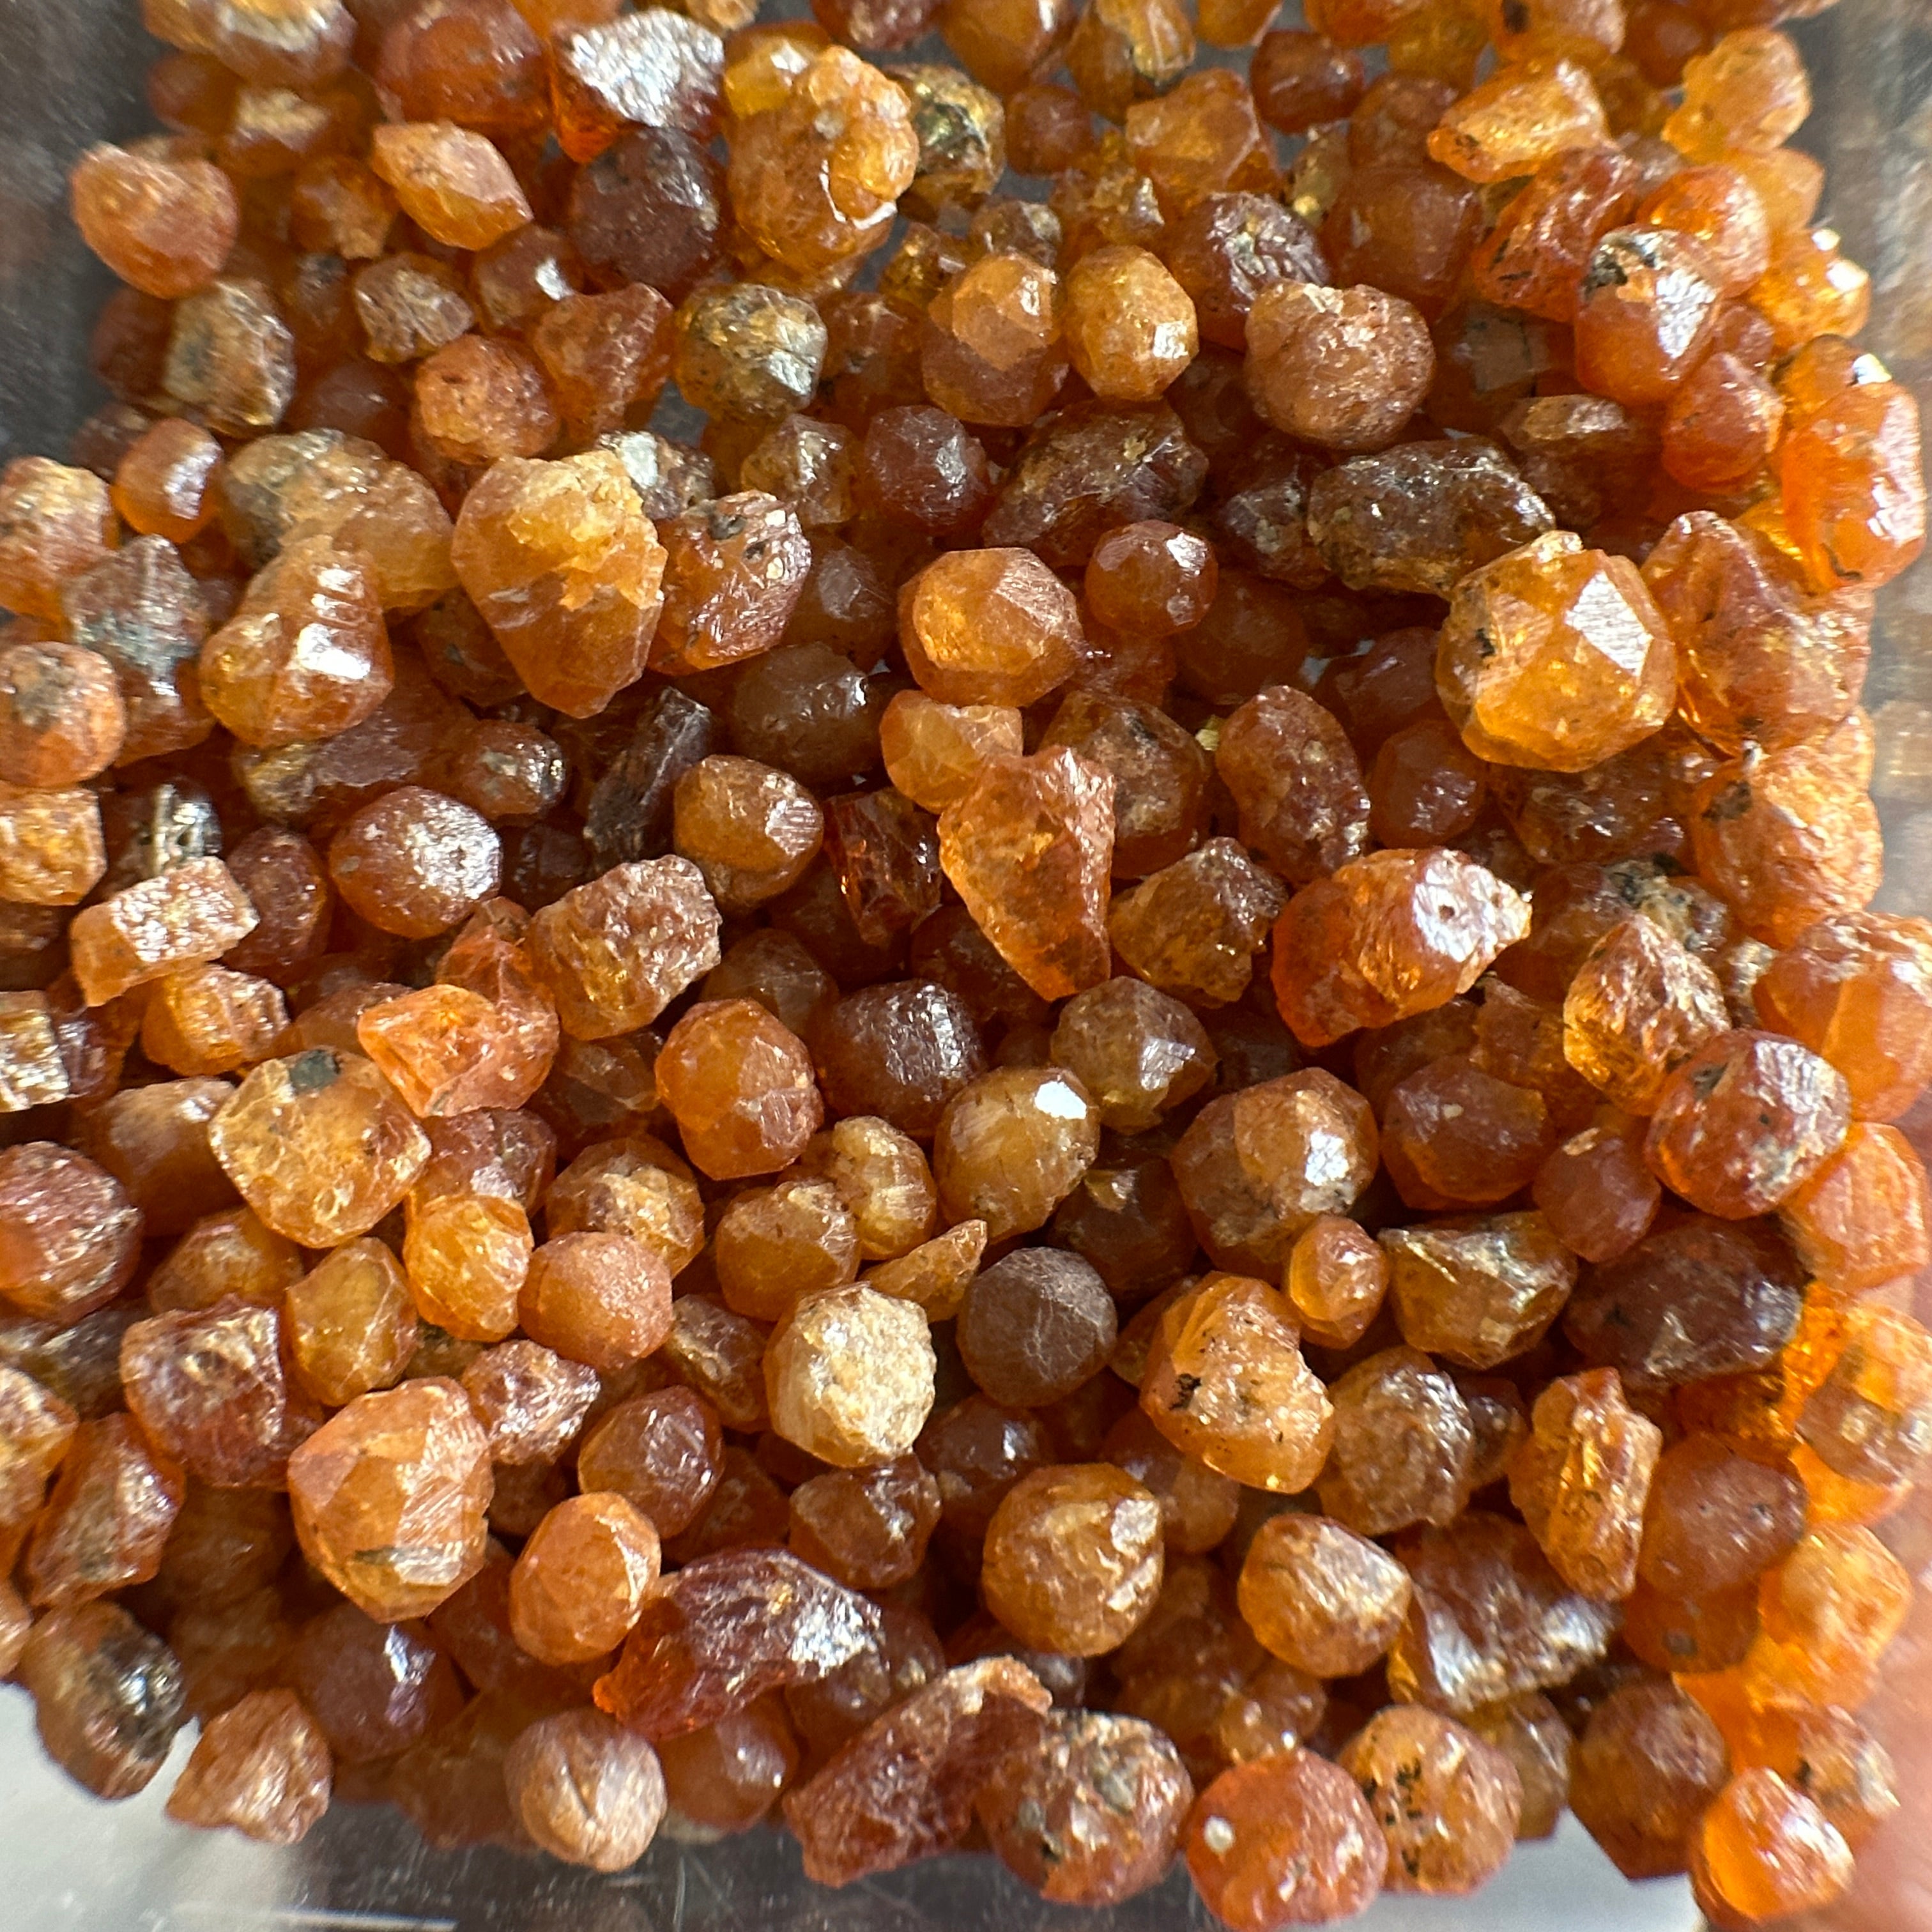 Mandarin Spessartite Crystals, Loliondo, Tanzania, Per Stone, want any particular size, just ask